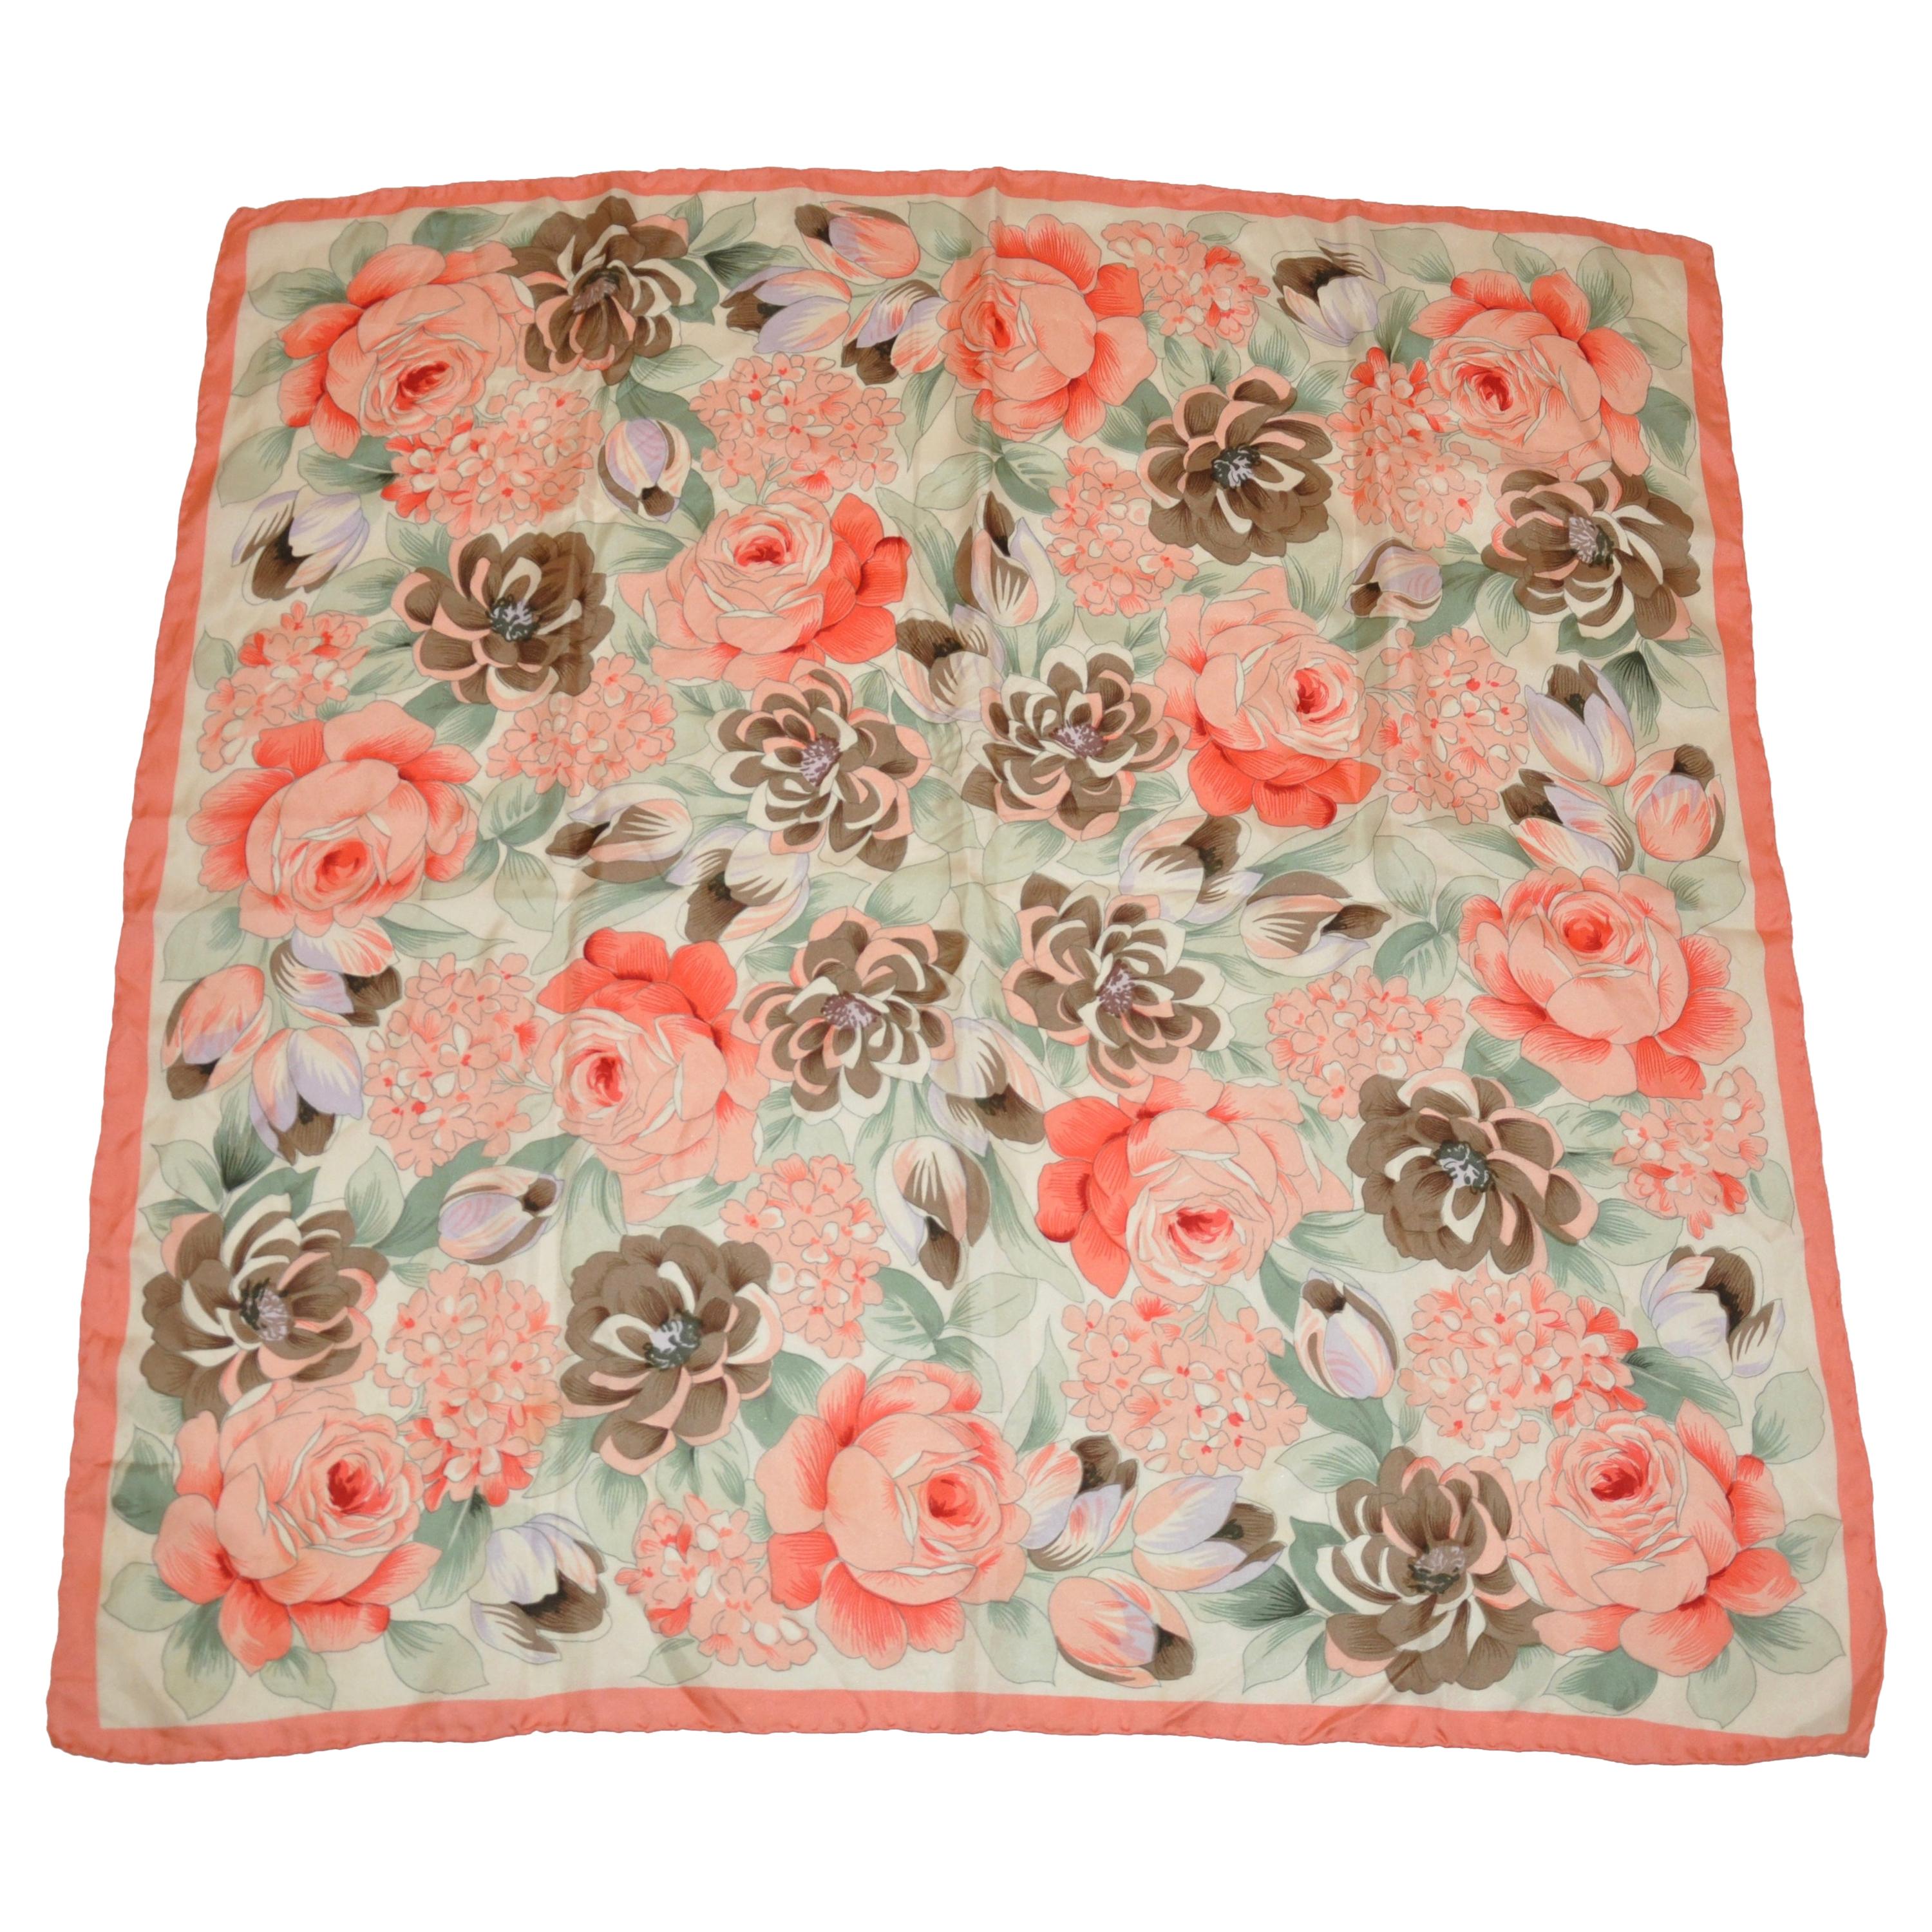 "Coral Borders" Multi Floral Silk Scarf with Hand-Rolled Edges